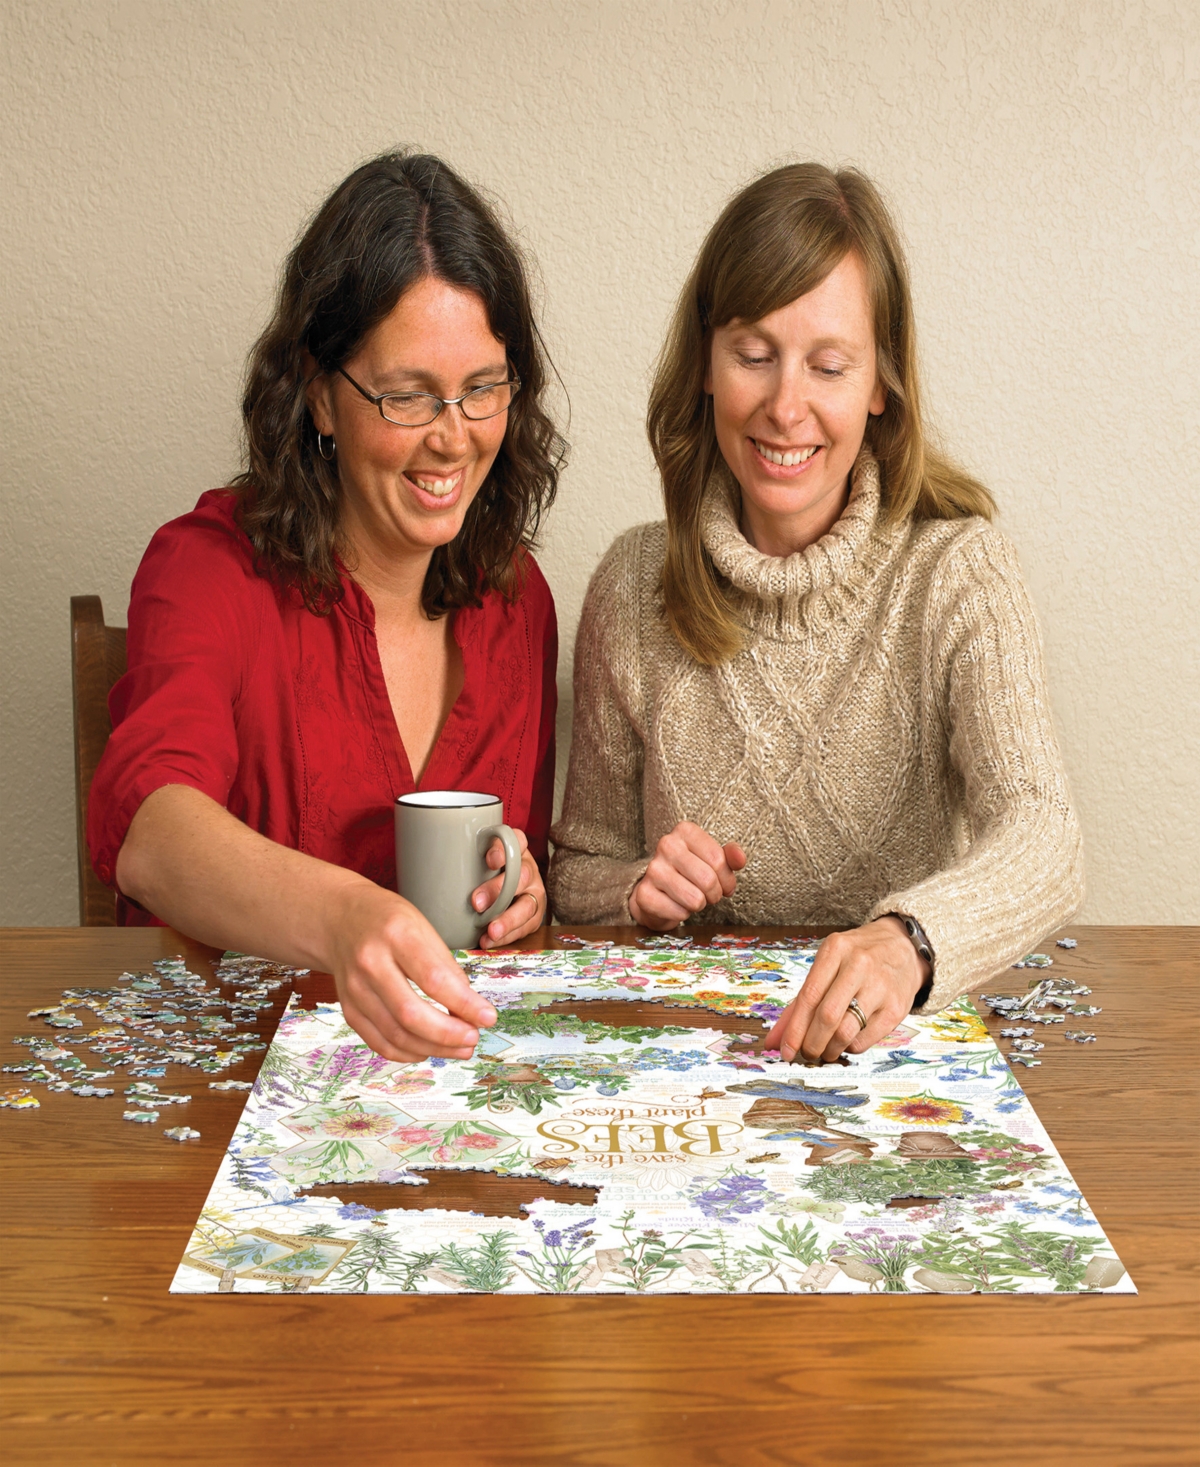 Shop Cobble Hill - Save The Bees Puzzle In Multi